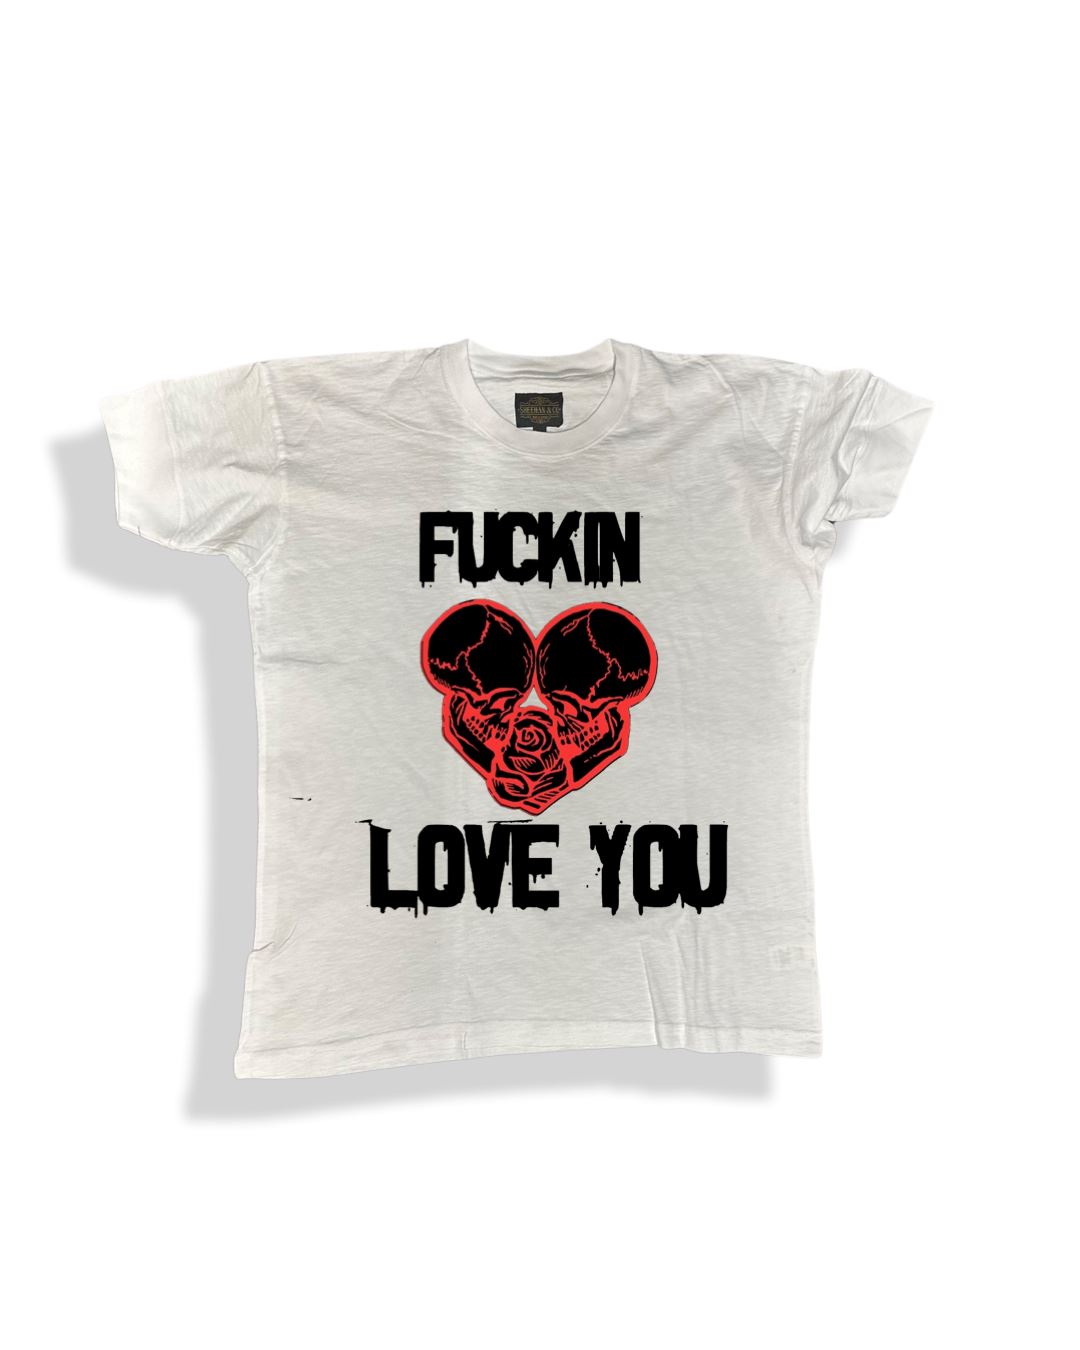 Fu@$in Love You Statement Tee - Sheehan and Co.